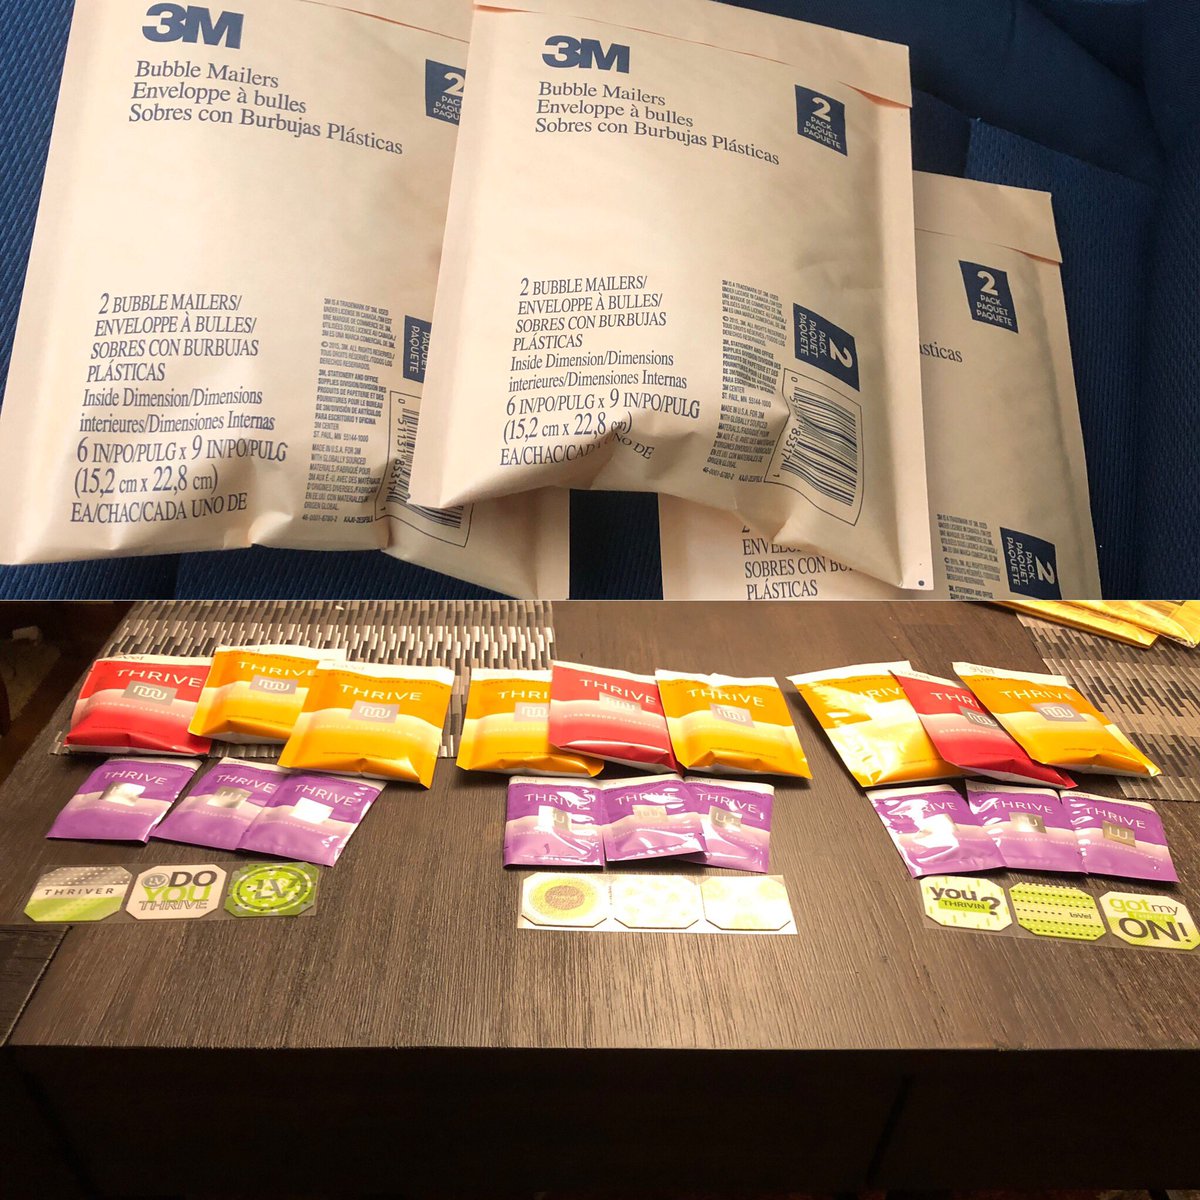 These 3 mini experience just went out in the mail today!! Can’t wait for the ladies to receive these. #3simplesteps #miniexperience #survingtothriving #helpingother